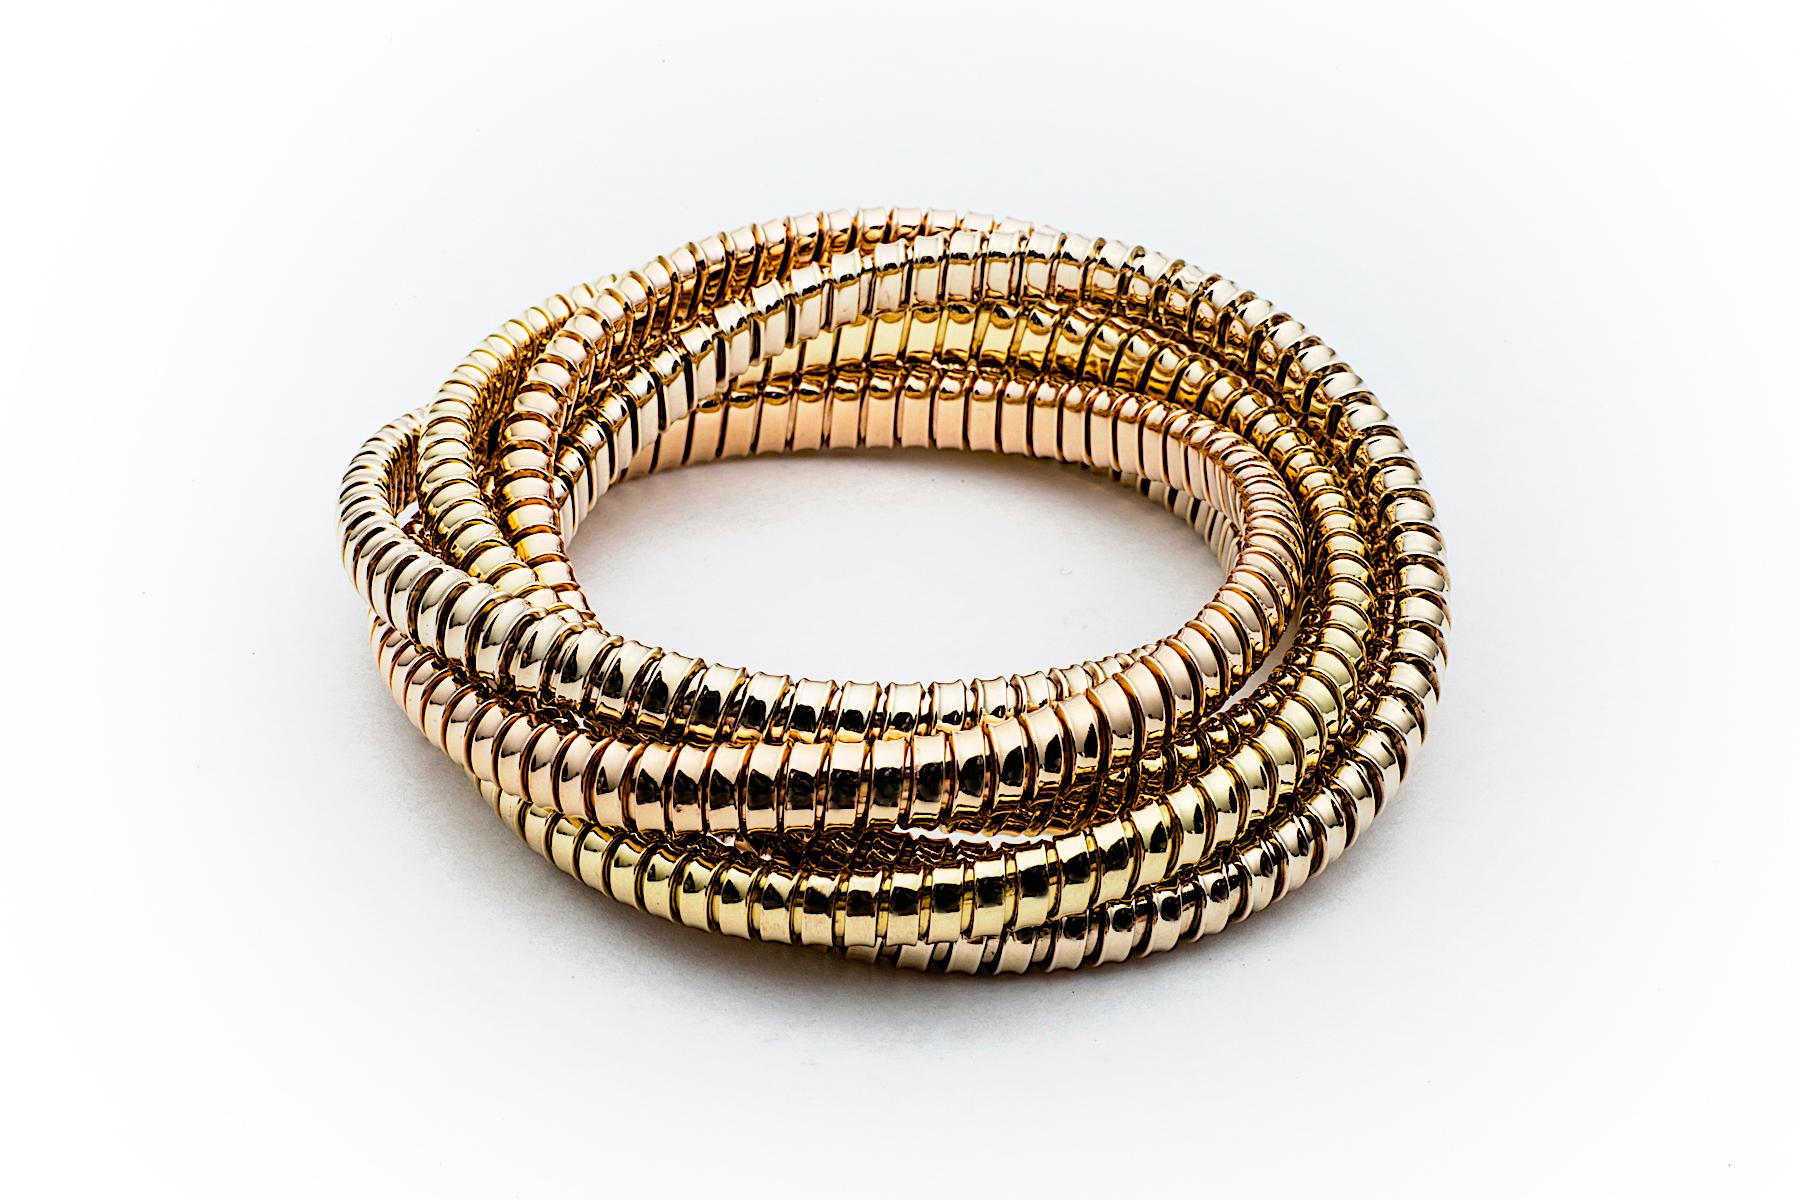 With a timeless but modern style, this chic intertwined six strand 6.5 mm tubogas rolling bangle bracelet was originally inspired by the flexible automotive gas tubing of the 1920’s. Translated into luxurious 18 karat white, rose and yellow gold and